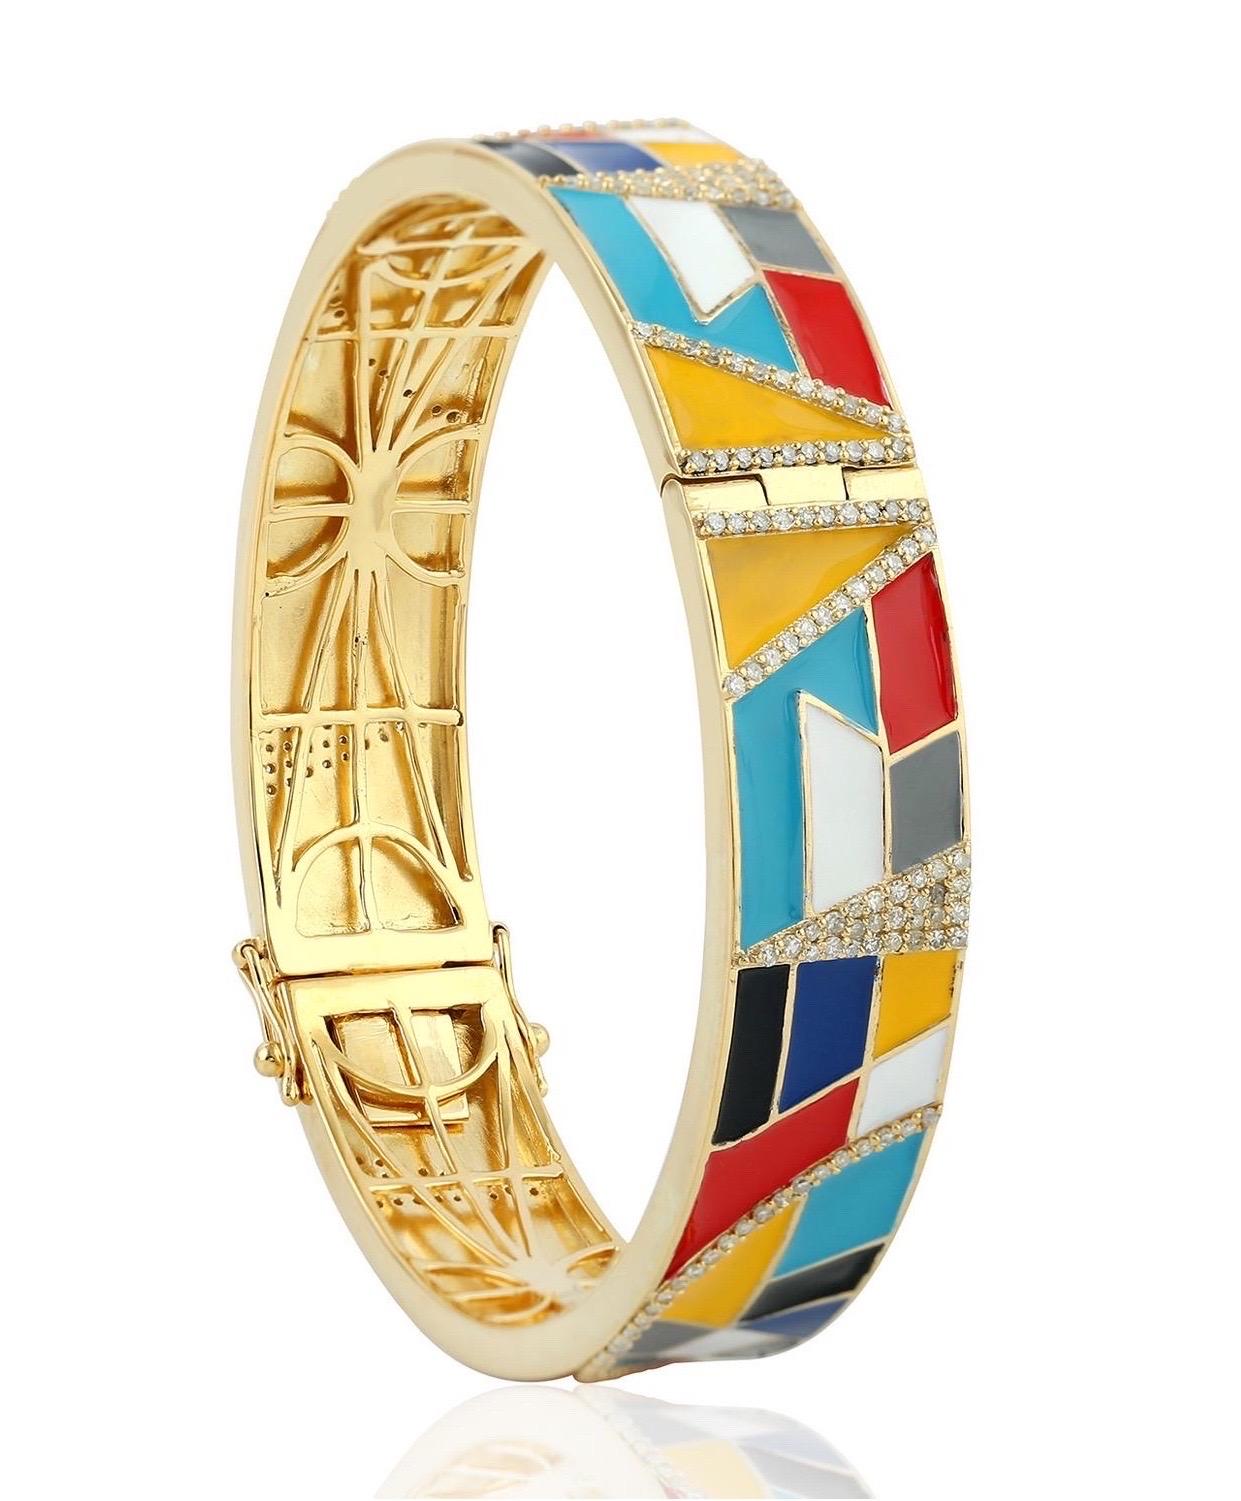 A multi color enamel bangle bracelet handmade in 18K gold & sterling silver.  It is hand set in 1.52 carats of sparkling diamonds. 

FOLLOW MEGHNA JEWELS storefront to view the latest collection & exclusive pieces. Meghna Jewels is proudly rated as